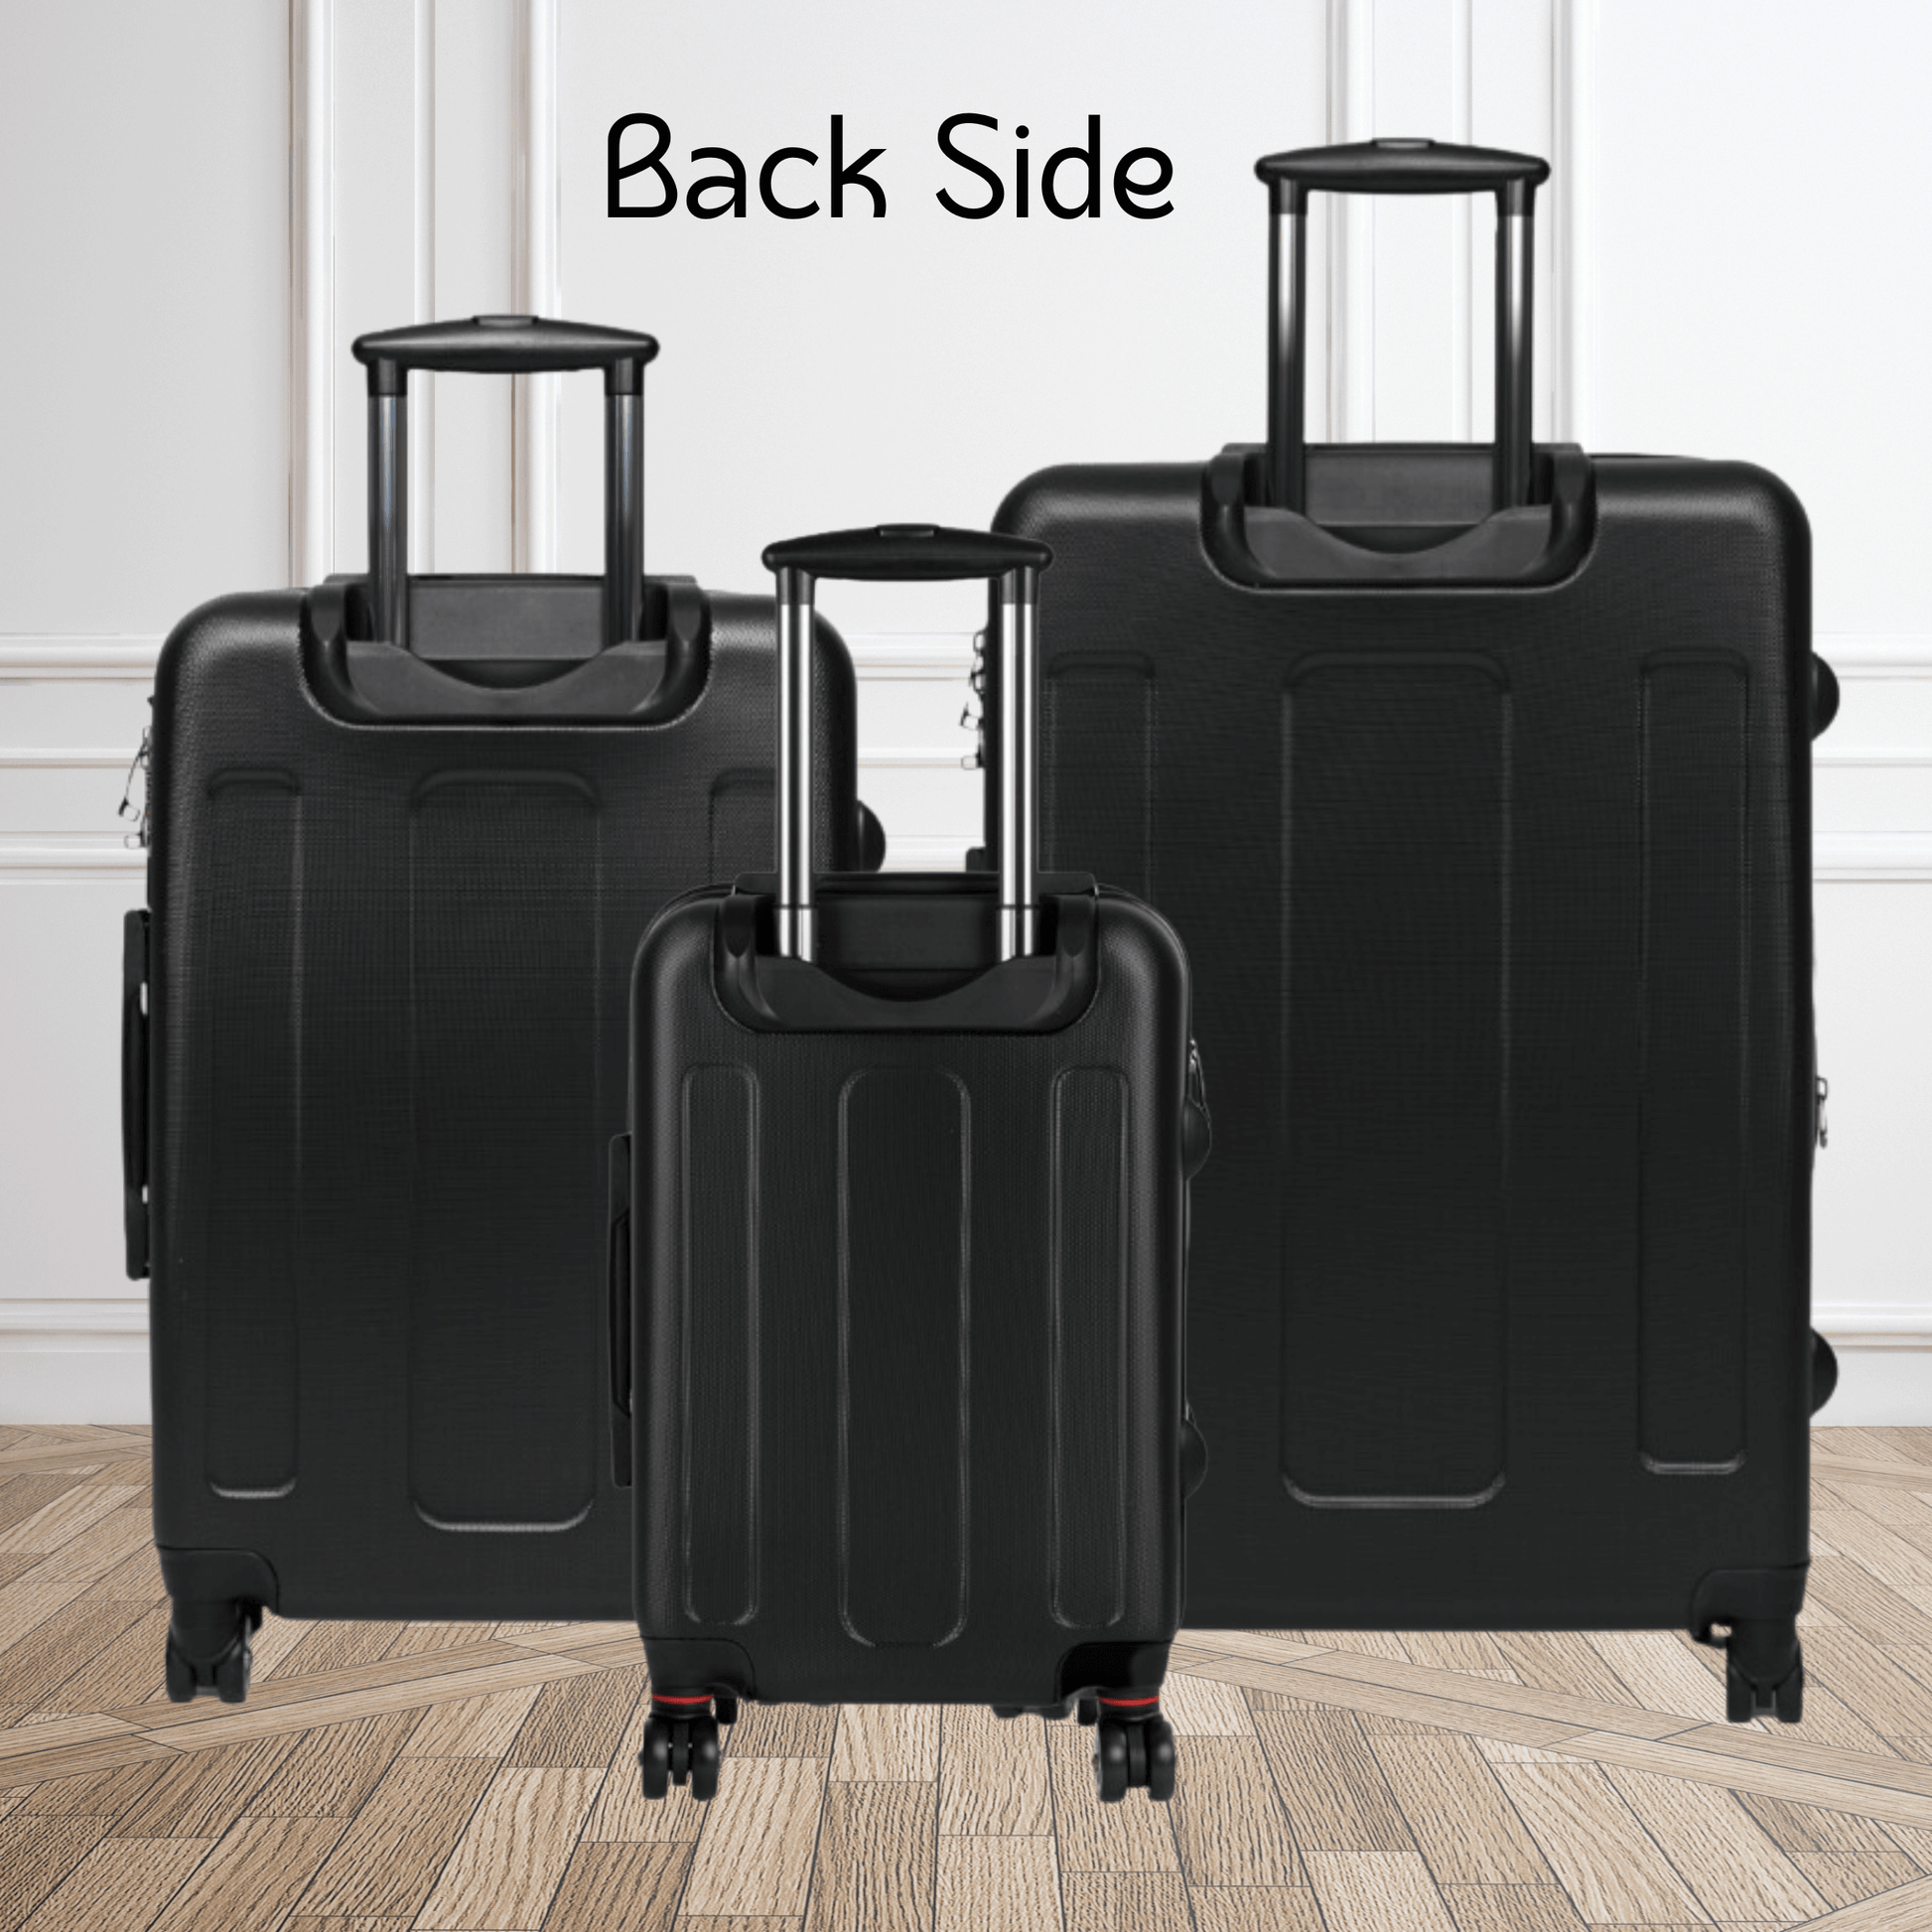 The back side of our luggage is black and scratch resistant.